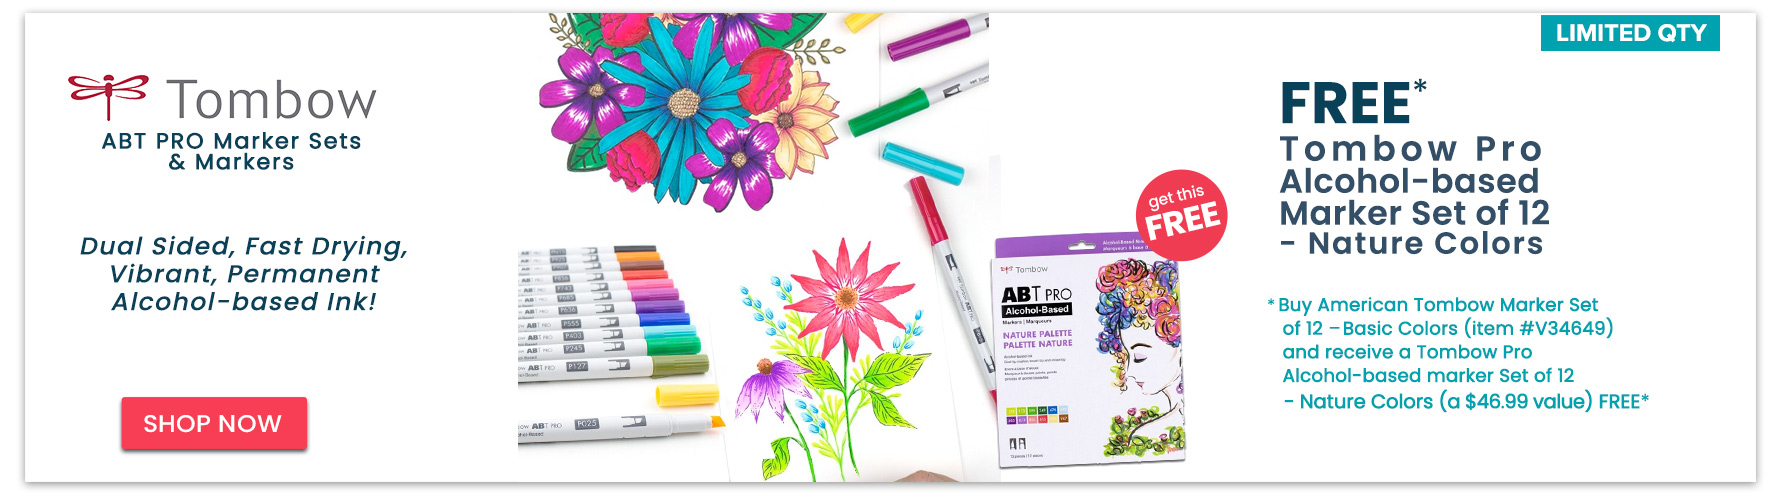 Tombow ABT PRO Marker Sets + Special Offer